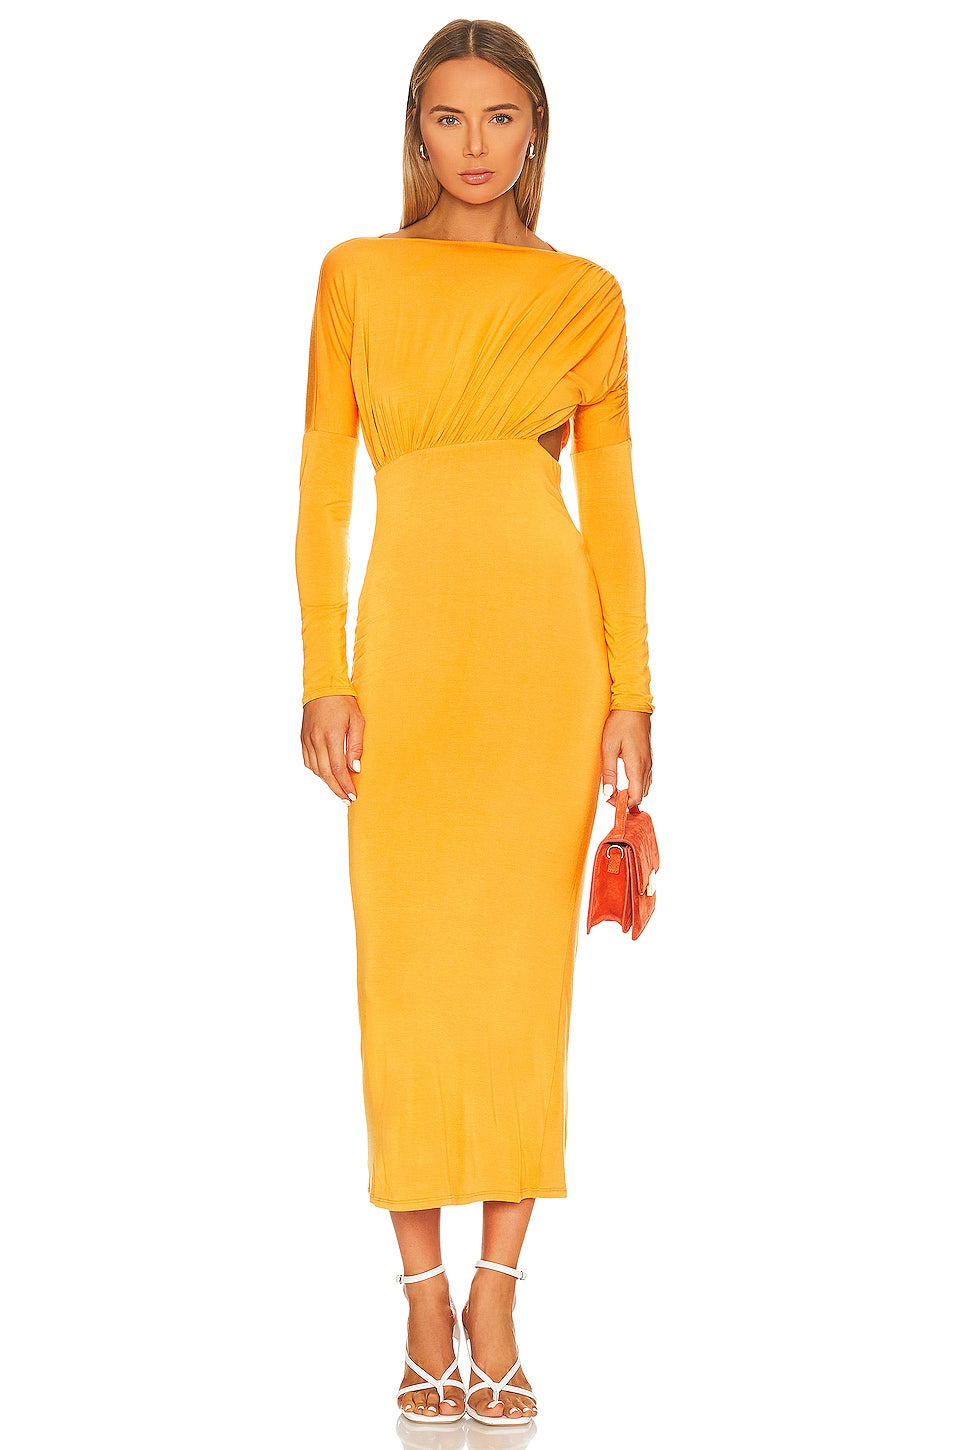 The Line by K Pascal Dress in Tangerine SIZE X-SMALL